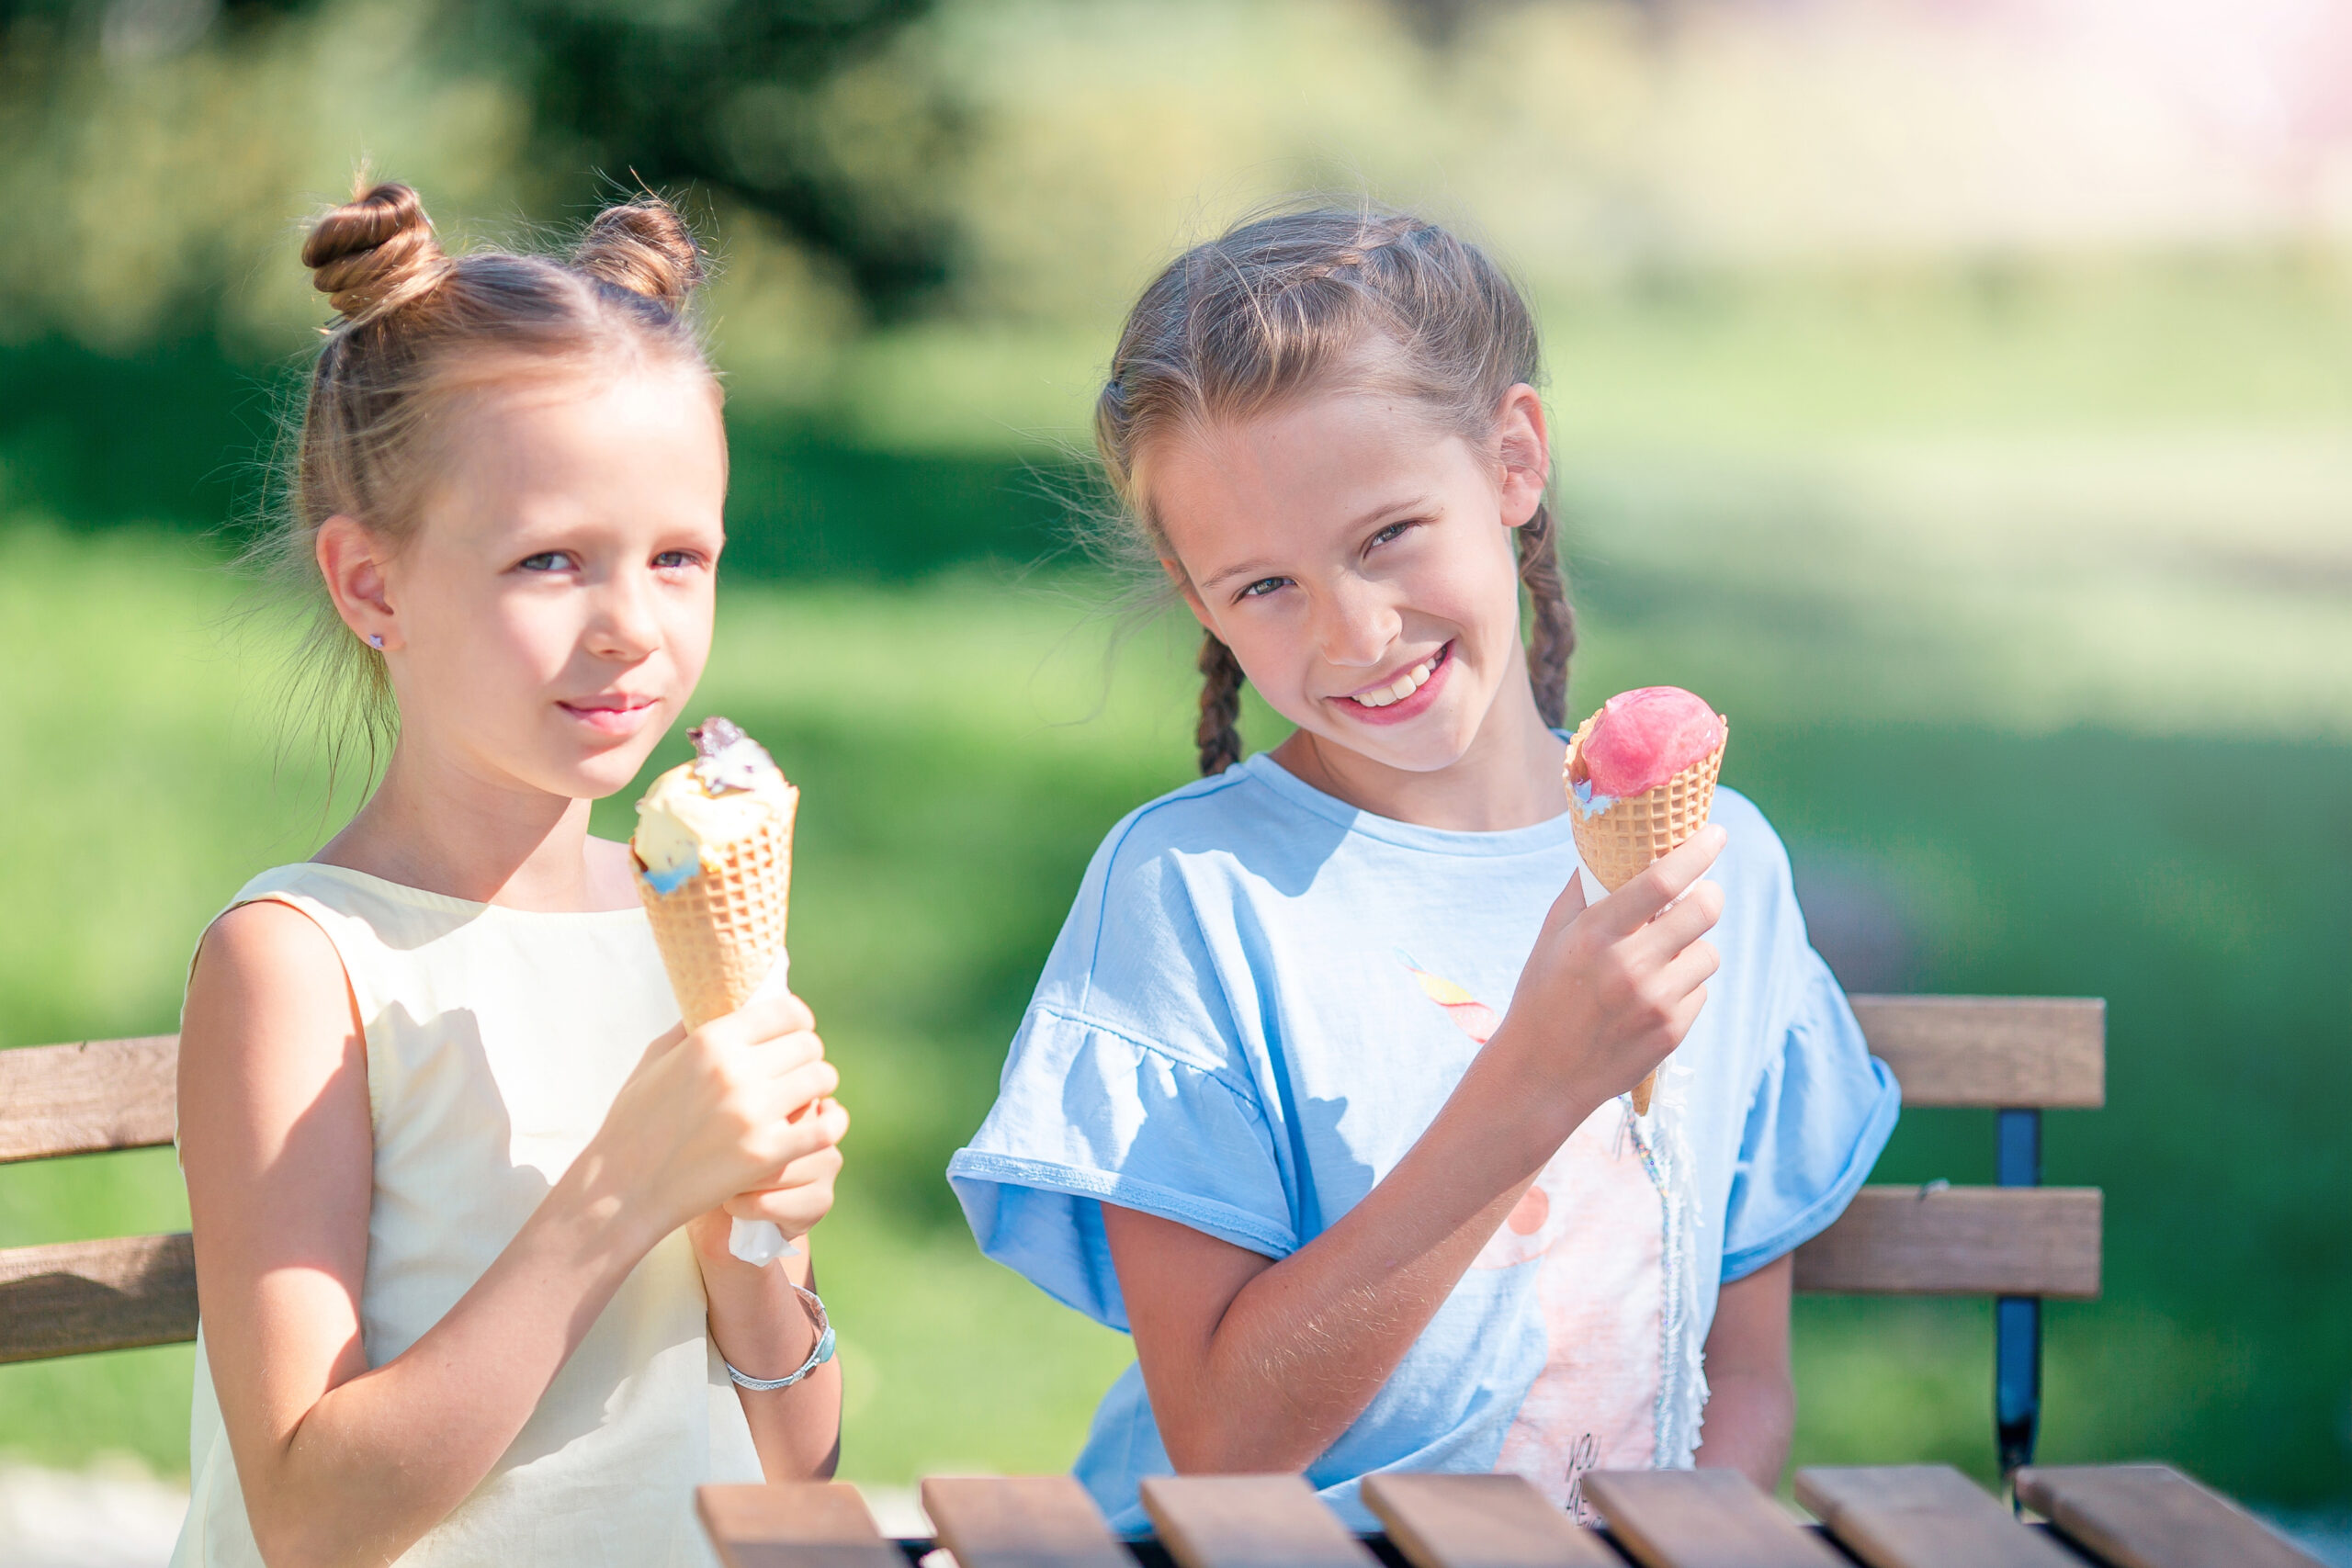 Children eating ice cream cones at a Franklin, Tennessee ice cream shop on an outdoor patio.